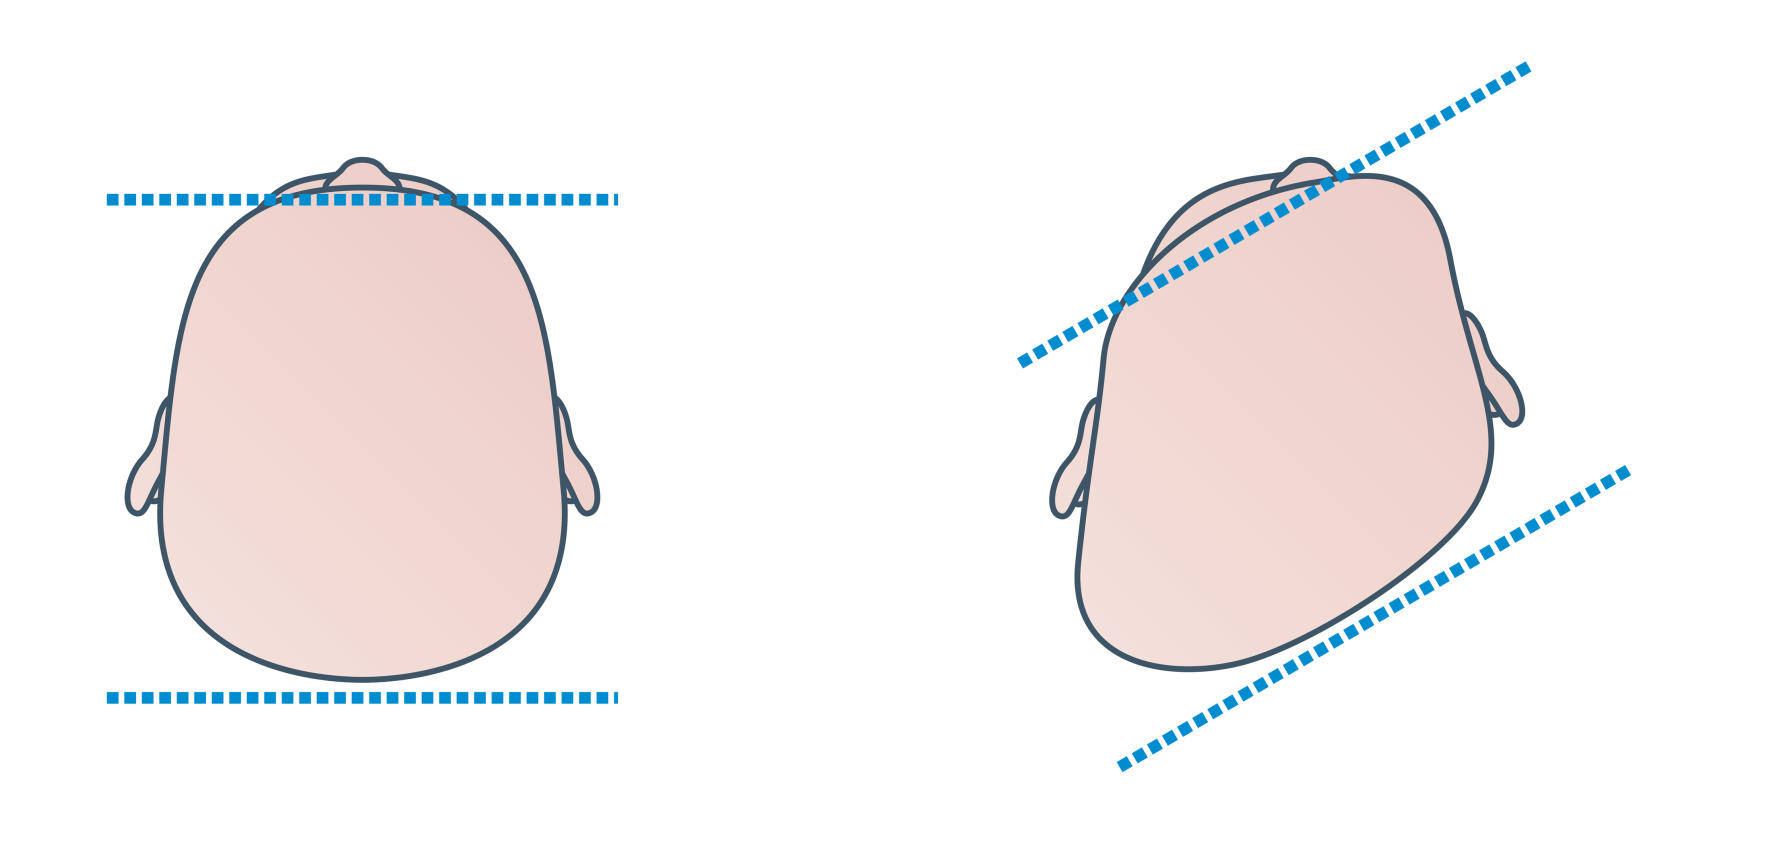 Plagiocephaly by The Royal Children’s Hospital